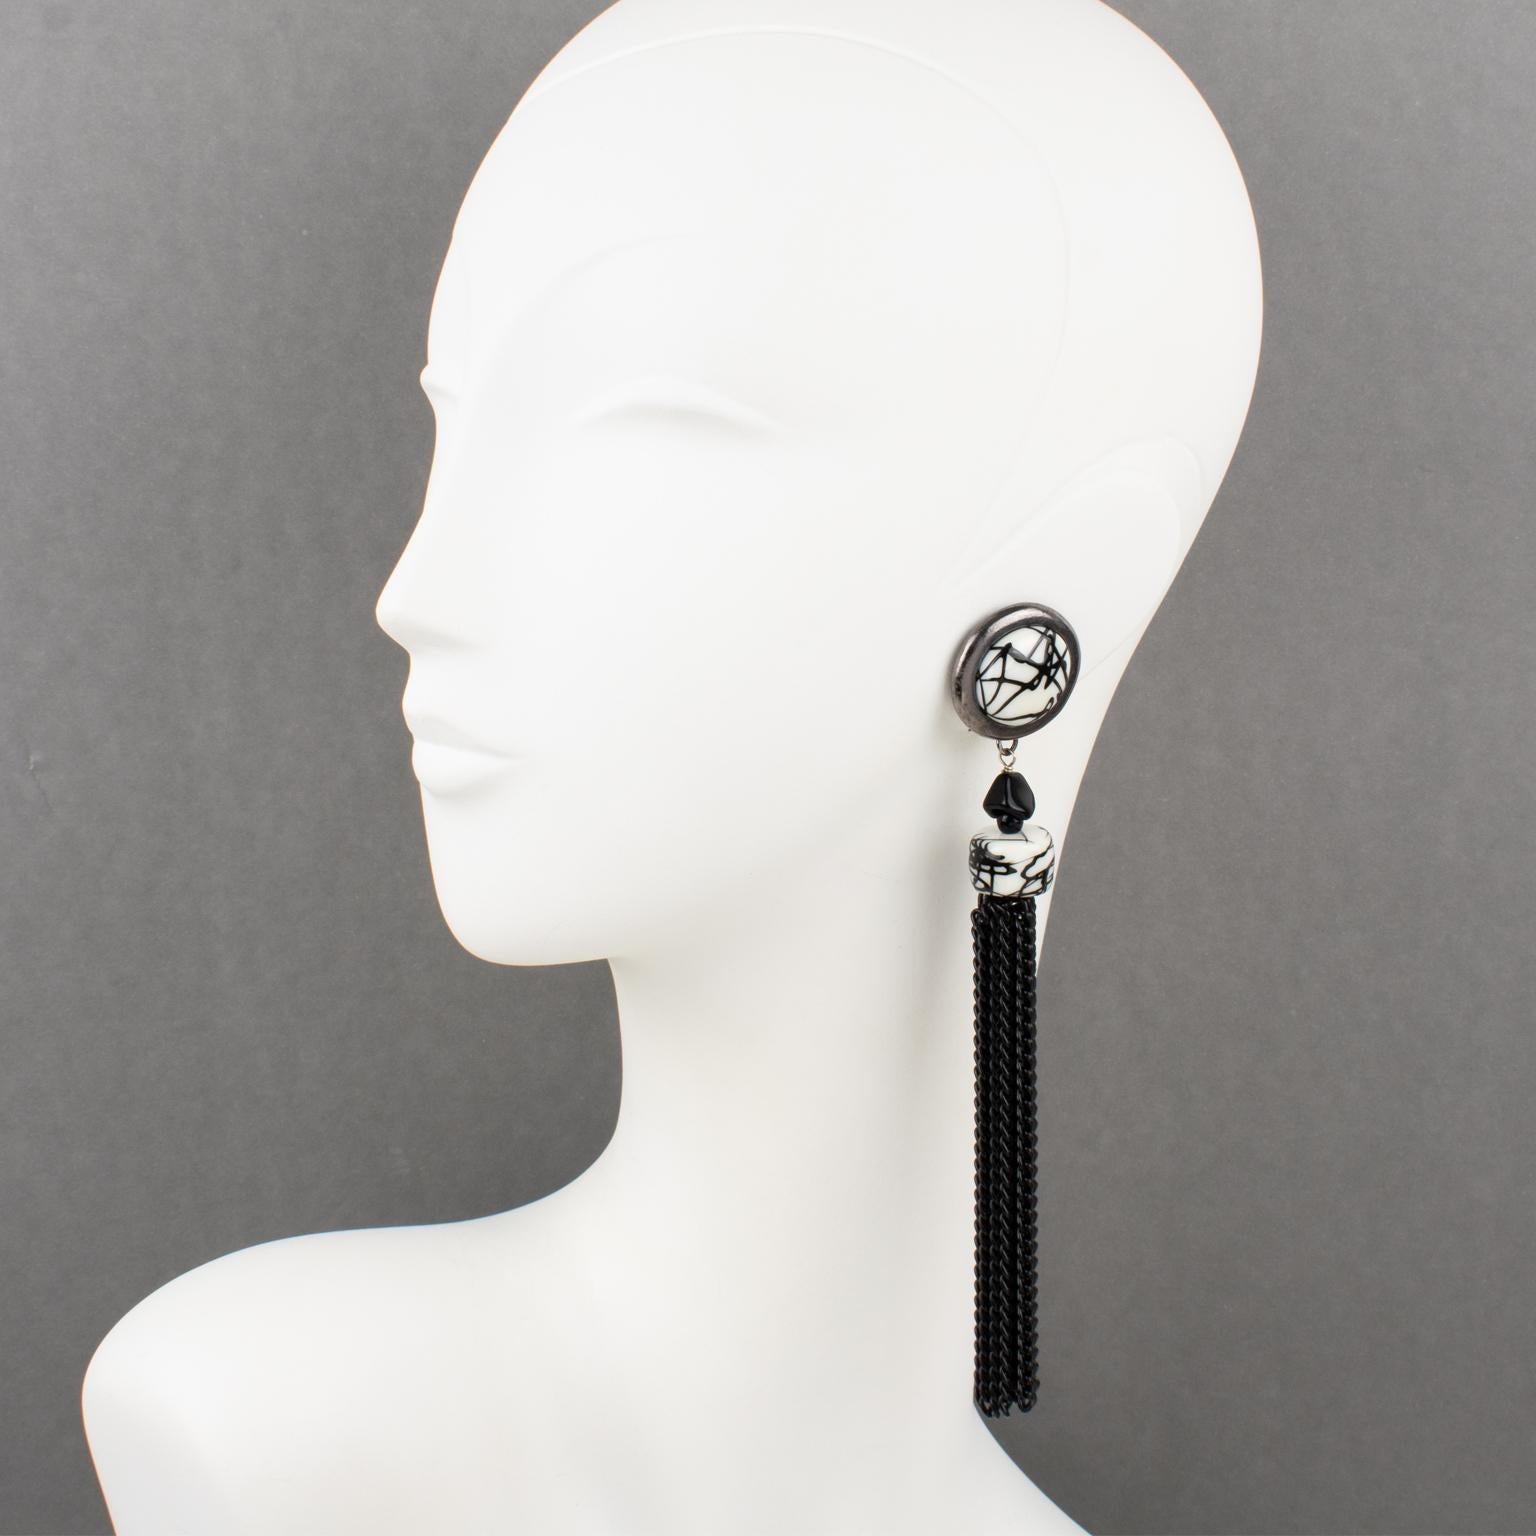 These lovely Paco Rabanne Paris futuristic clip-on earrings feature an oversized shoulder-duster dangling drop shape with gunmetal framing, topped with resin cabochons and beads in black and white colors and complemented with an extra long black